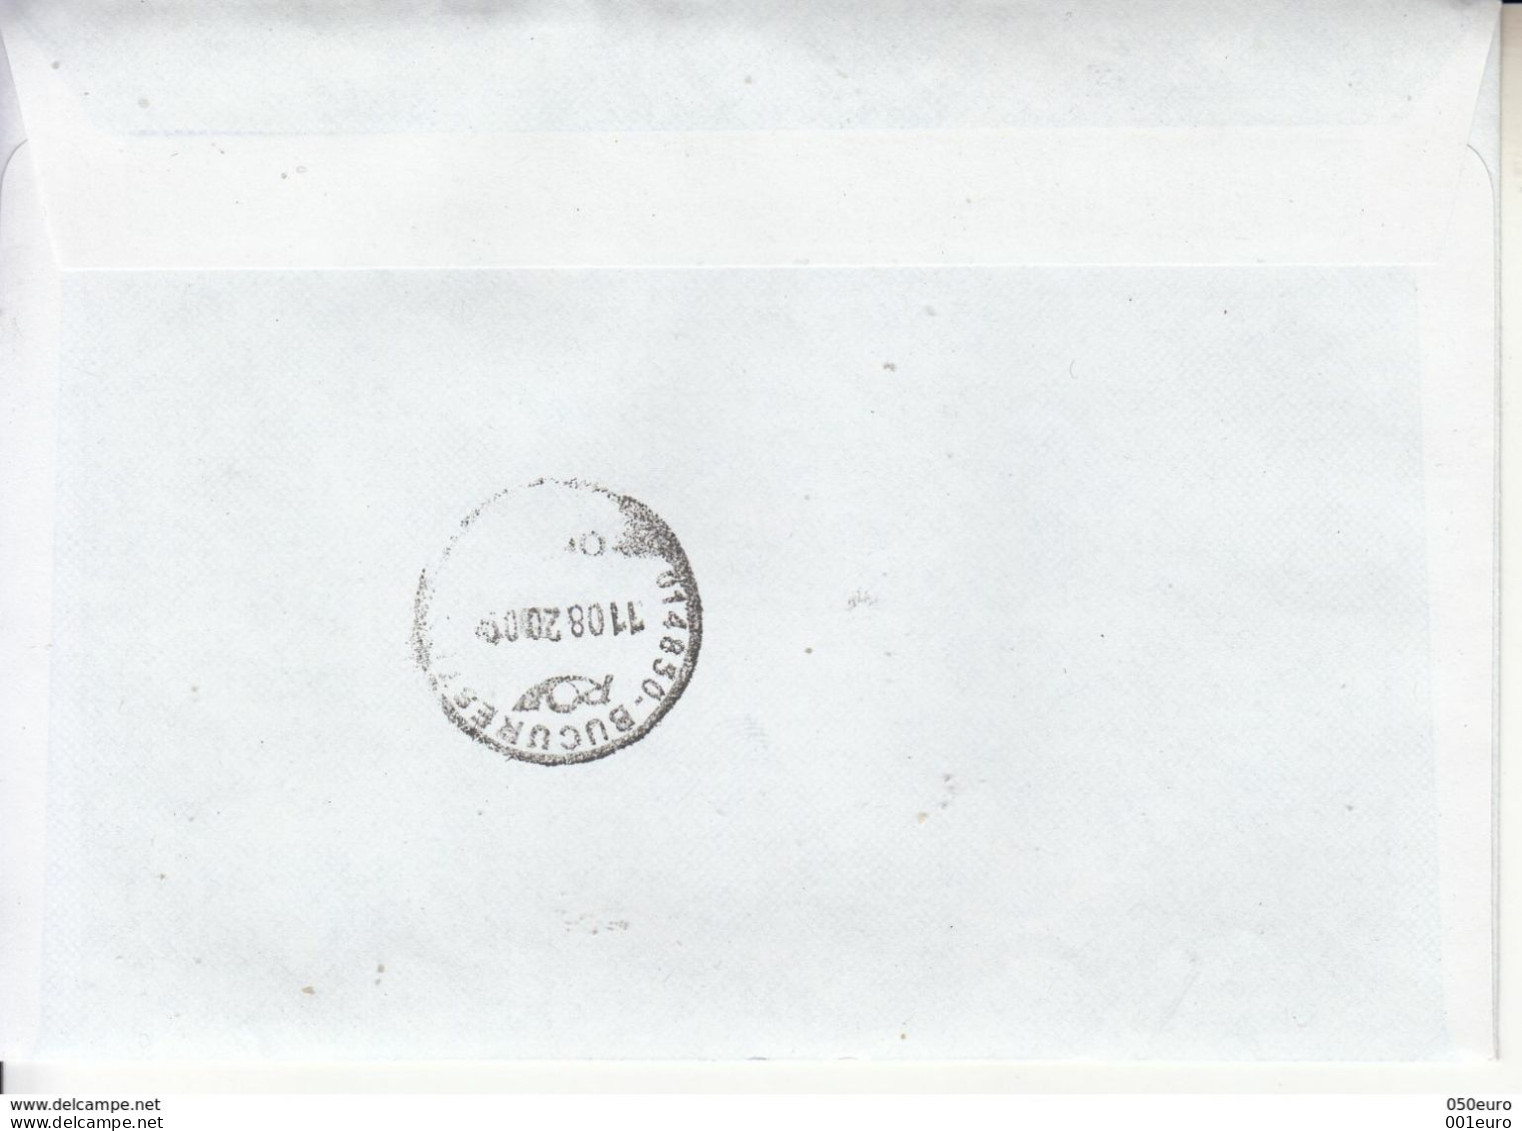 ROMANIA : LIGHTHOUSE Cover Circulated In Romania, For My Address #1063499191 - Registered Shipping! - Covers & Documents